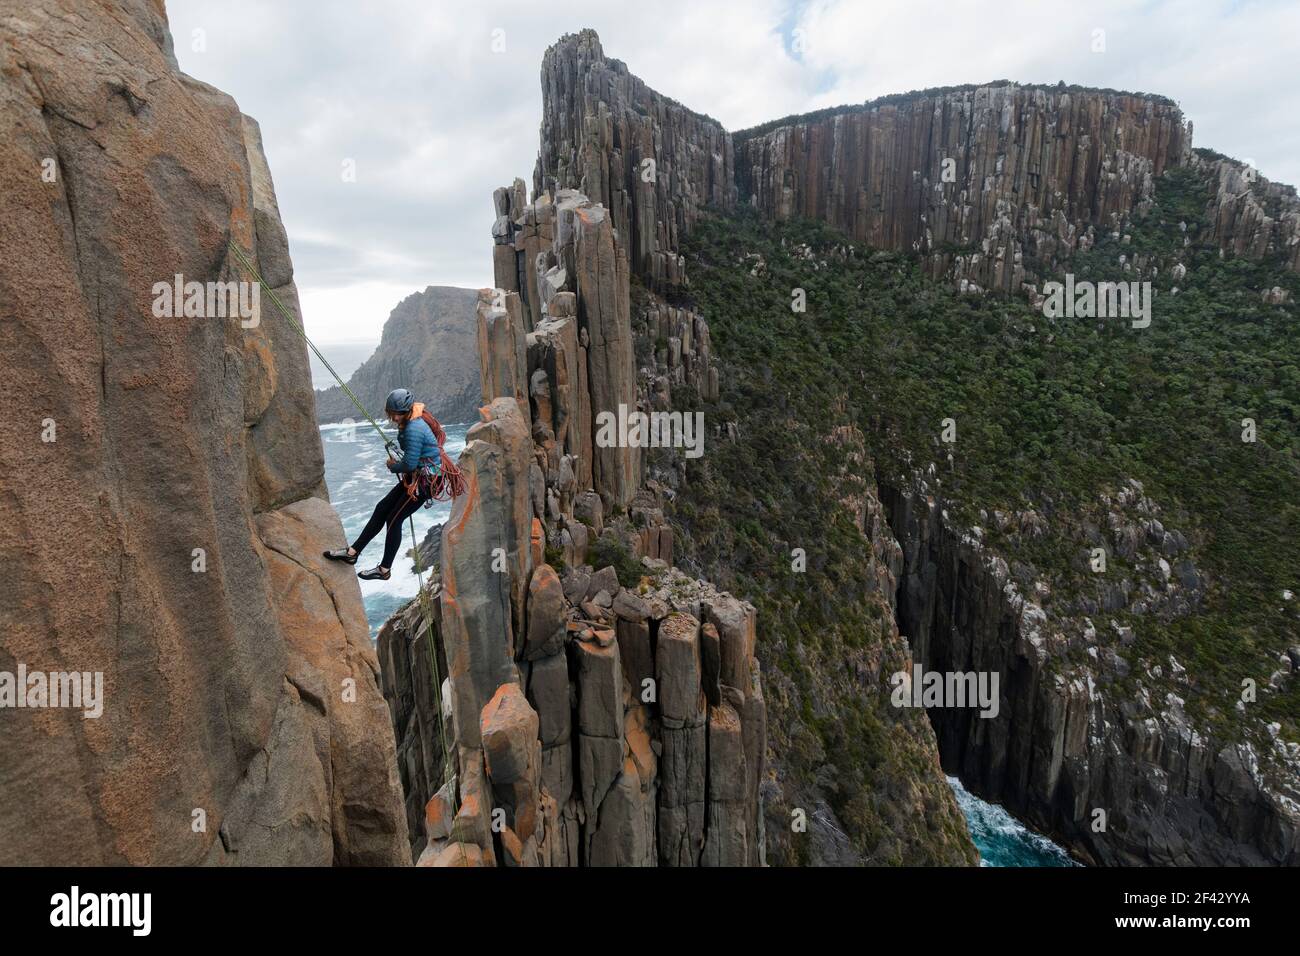 Female rockclimber looks down as she uses a rope to rappel from the edge of a sea cliff to continue exploring the dolerite columns of Cape Raoul, Tasmania, Australia. Stock Photo